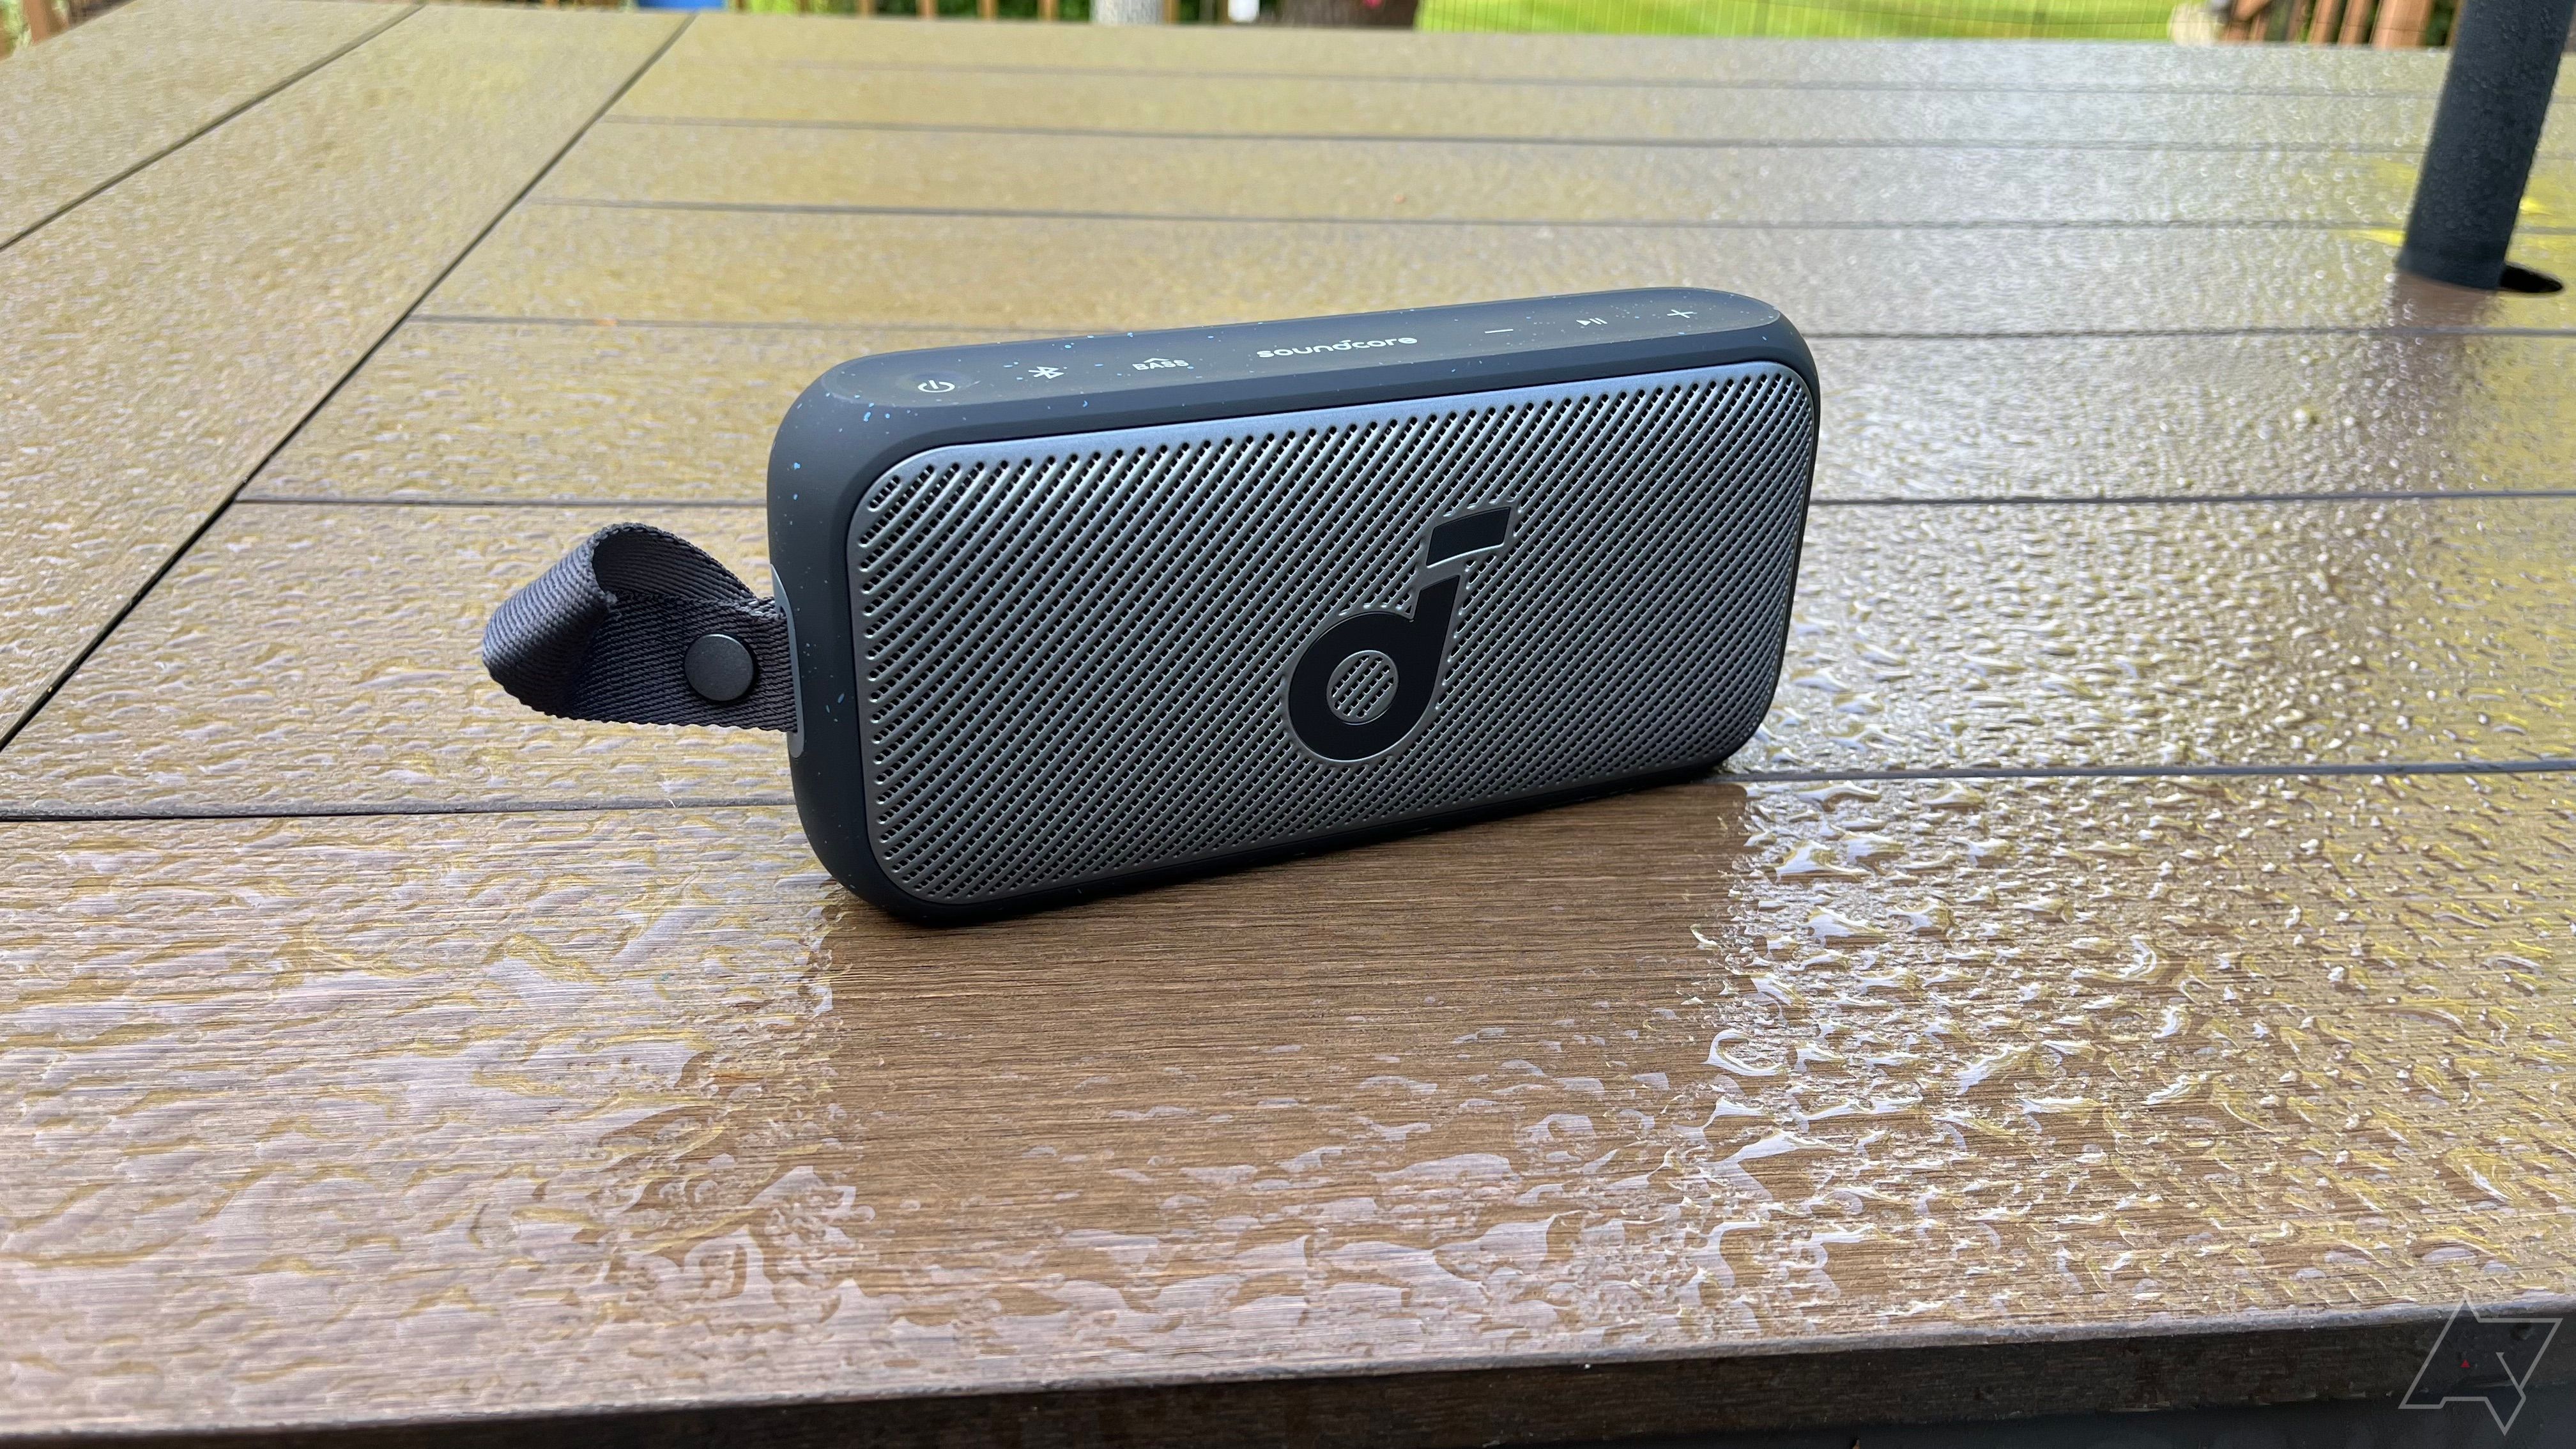 Anker Soundcore Motion 300 Bluetooth Speaker Review: The Price Is